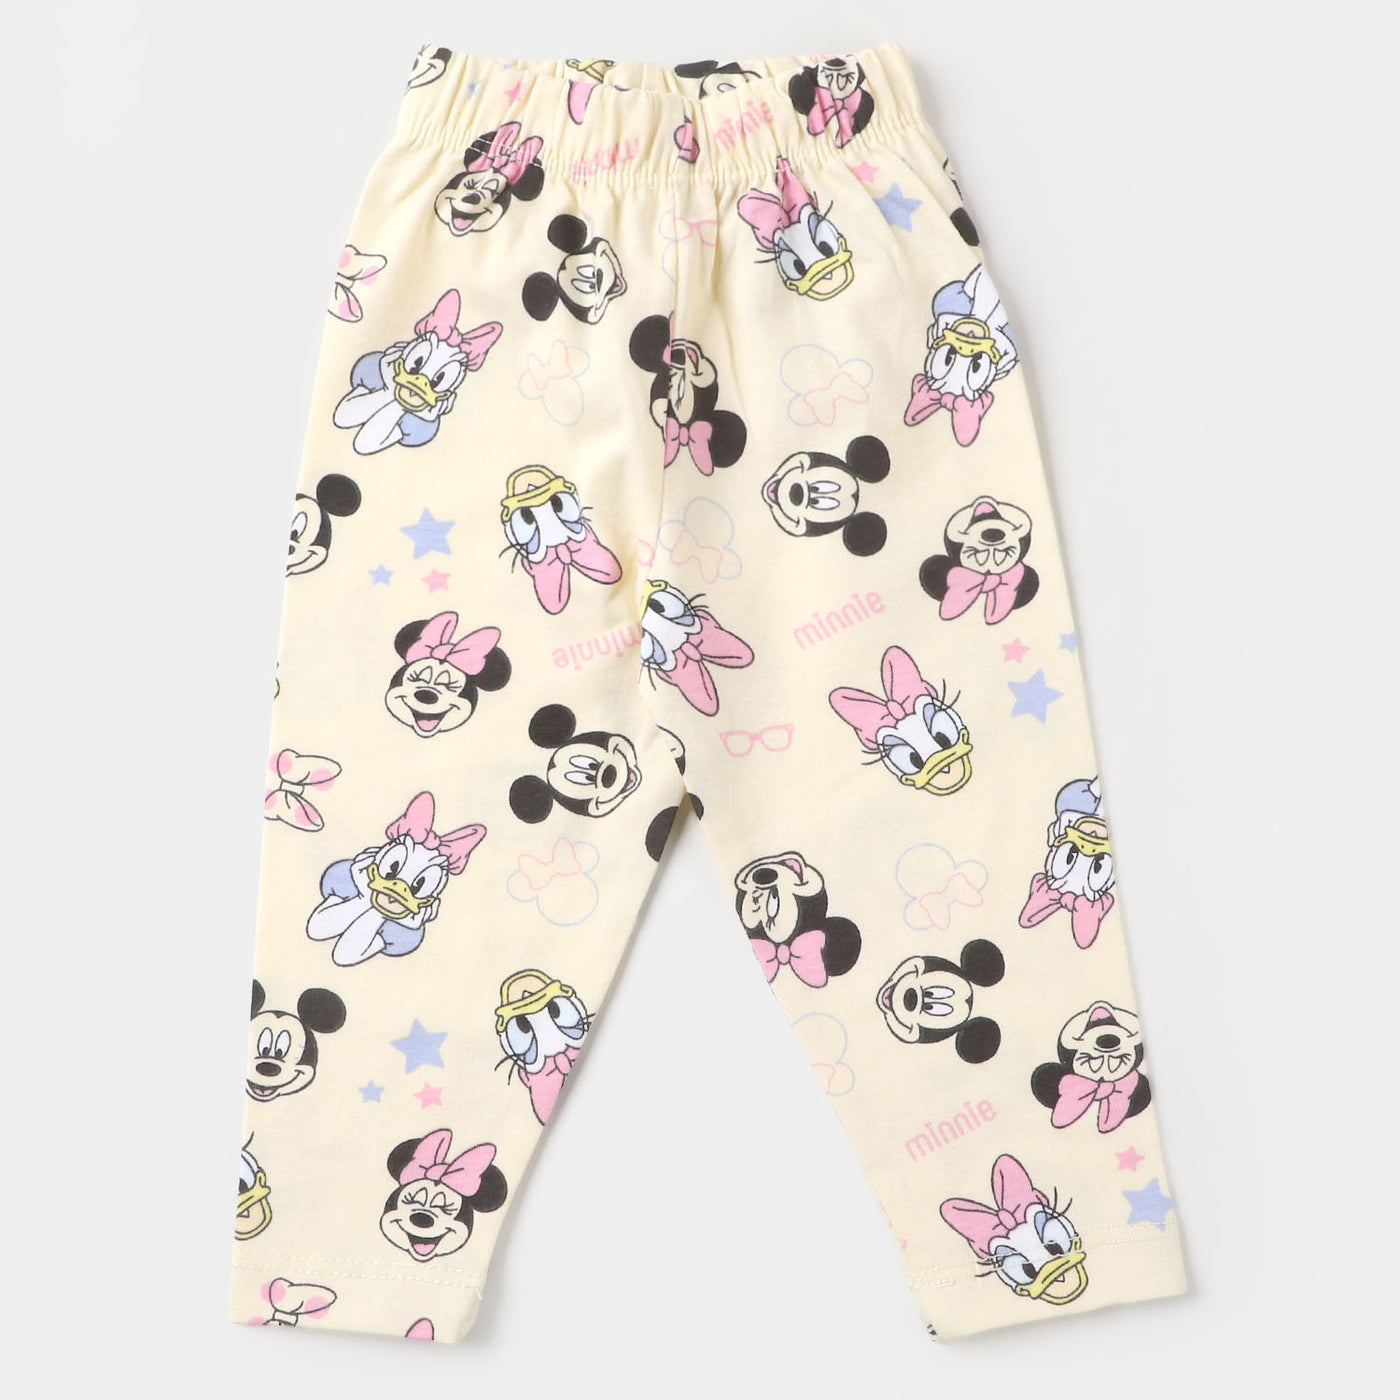 Infant Girls Printed Tights Printed  - Cream